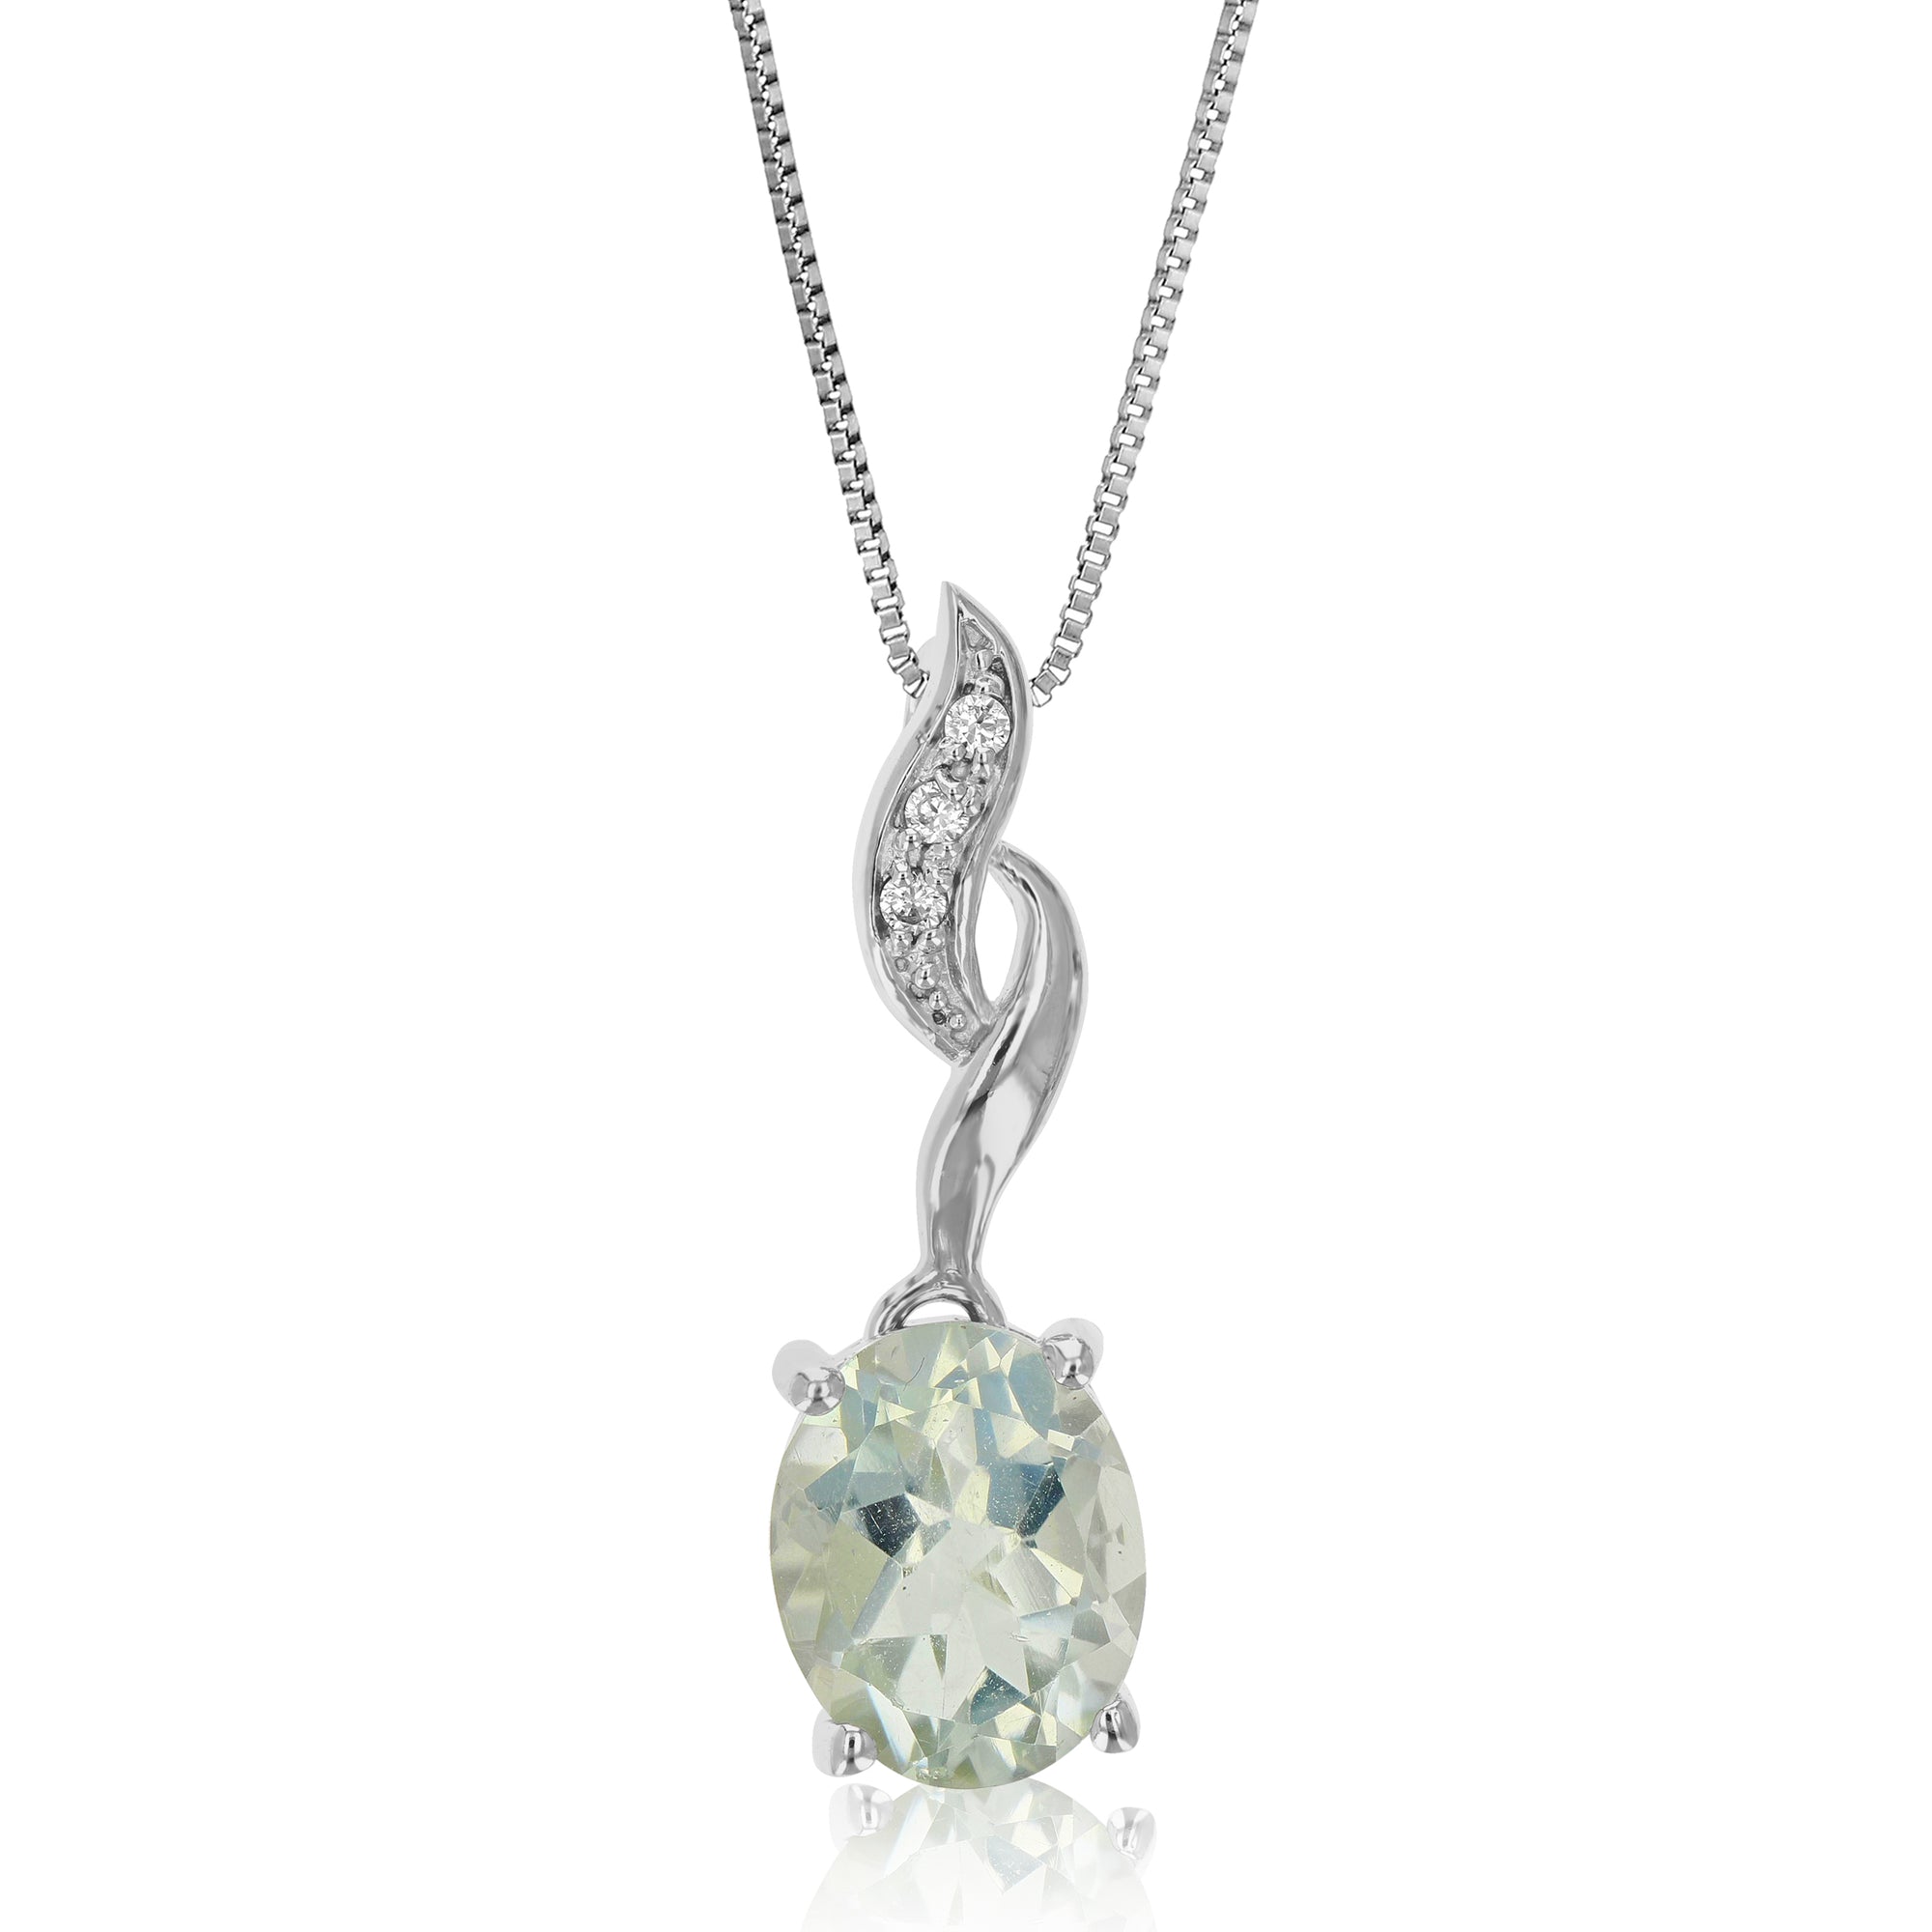 1.60 cttw Pendant Necklace, Green Amethyst Oval Pendant Necklace for Women in .925 Sterling Silver with Rhodium, 18 Inch Chain, Prong Setting